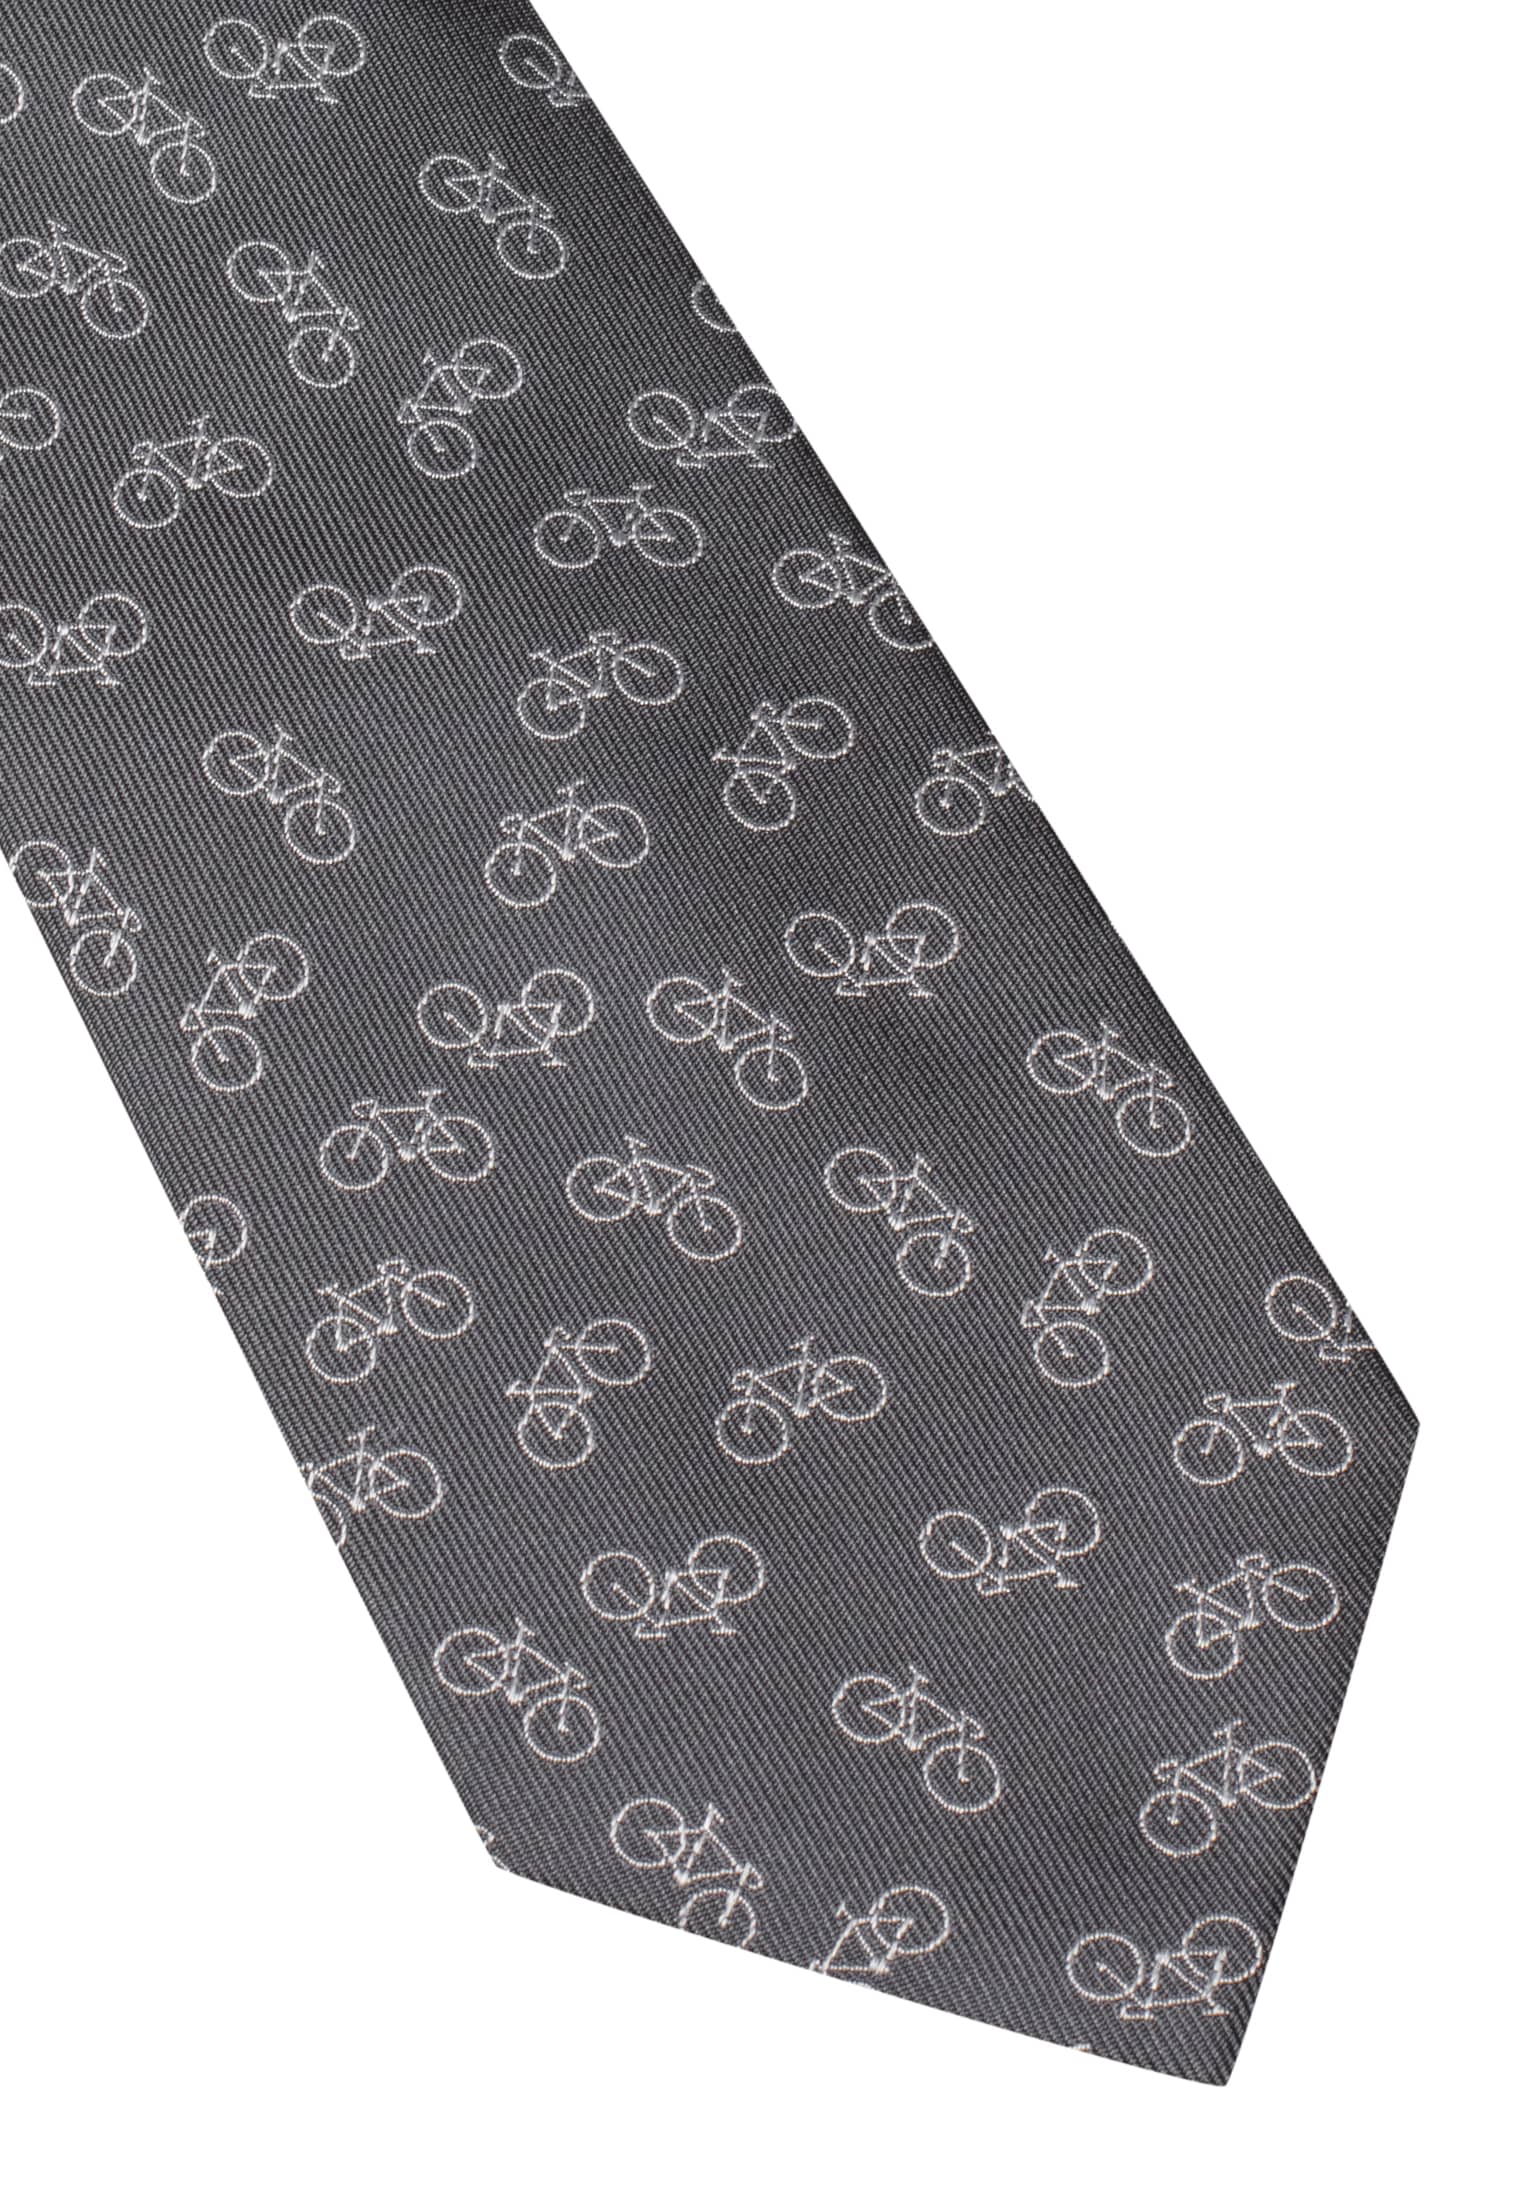 Tie in anthracite patterned